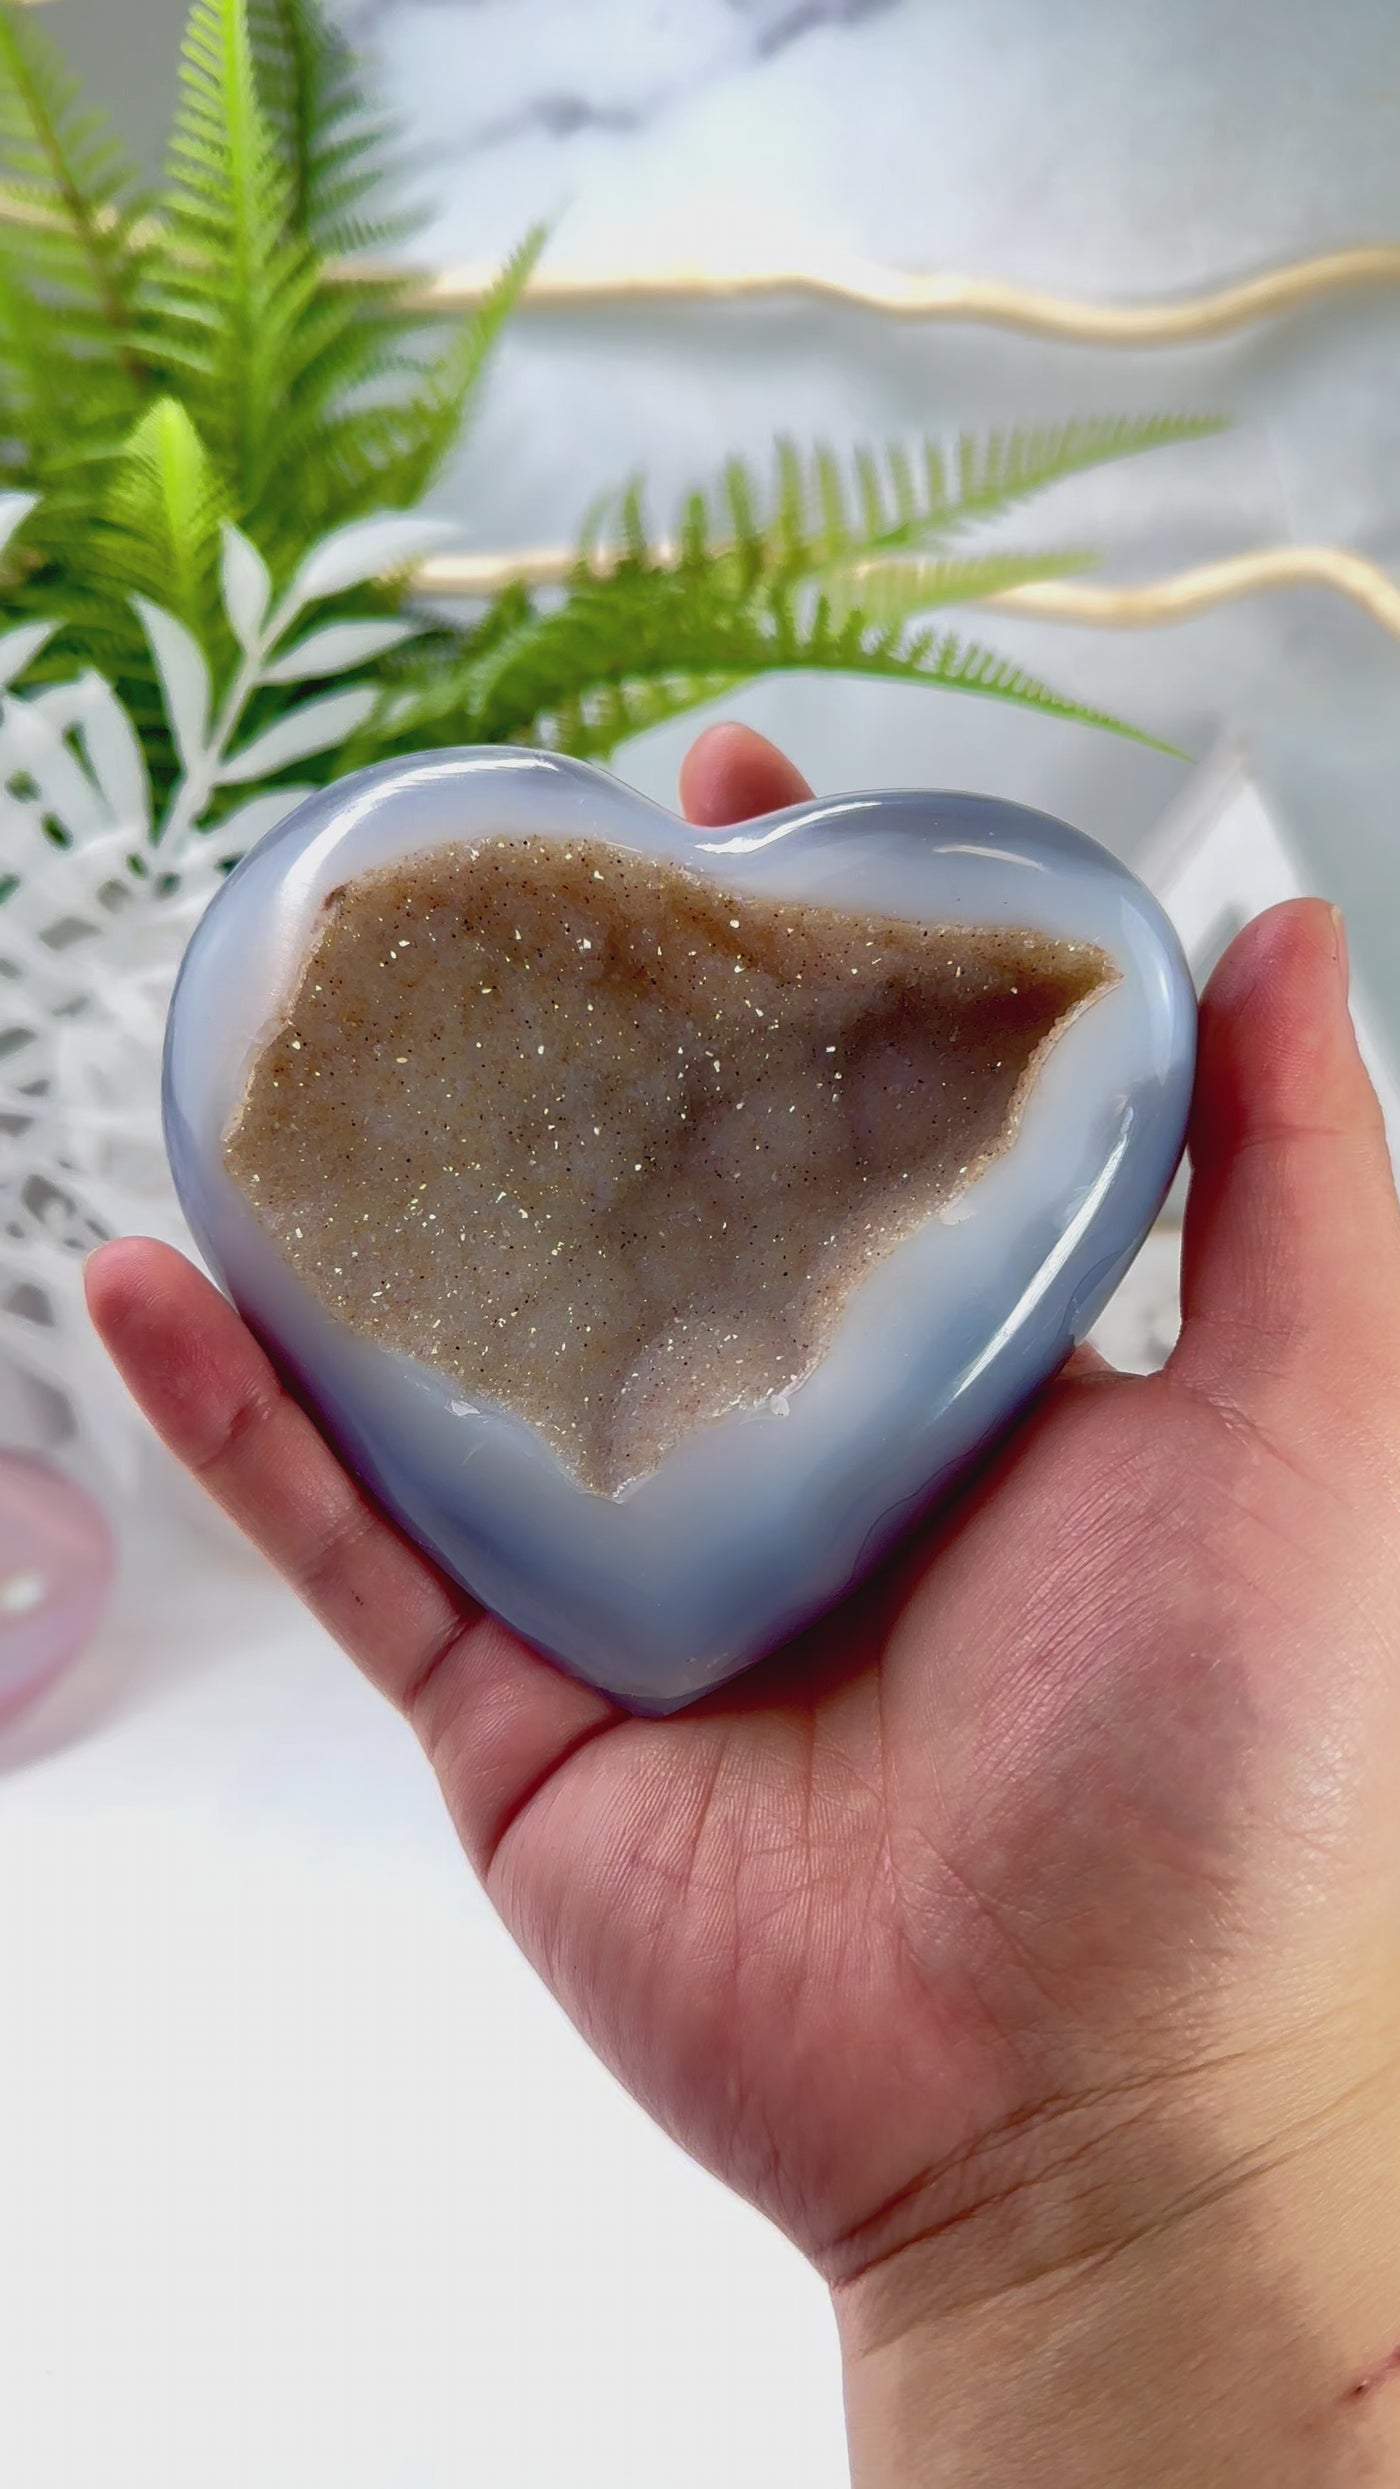 Agate Geode Heart with Druzy - Polished Crystal Heart video showing glittering effect of druzy crystals